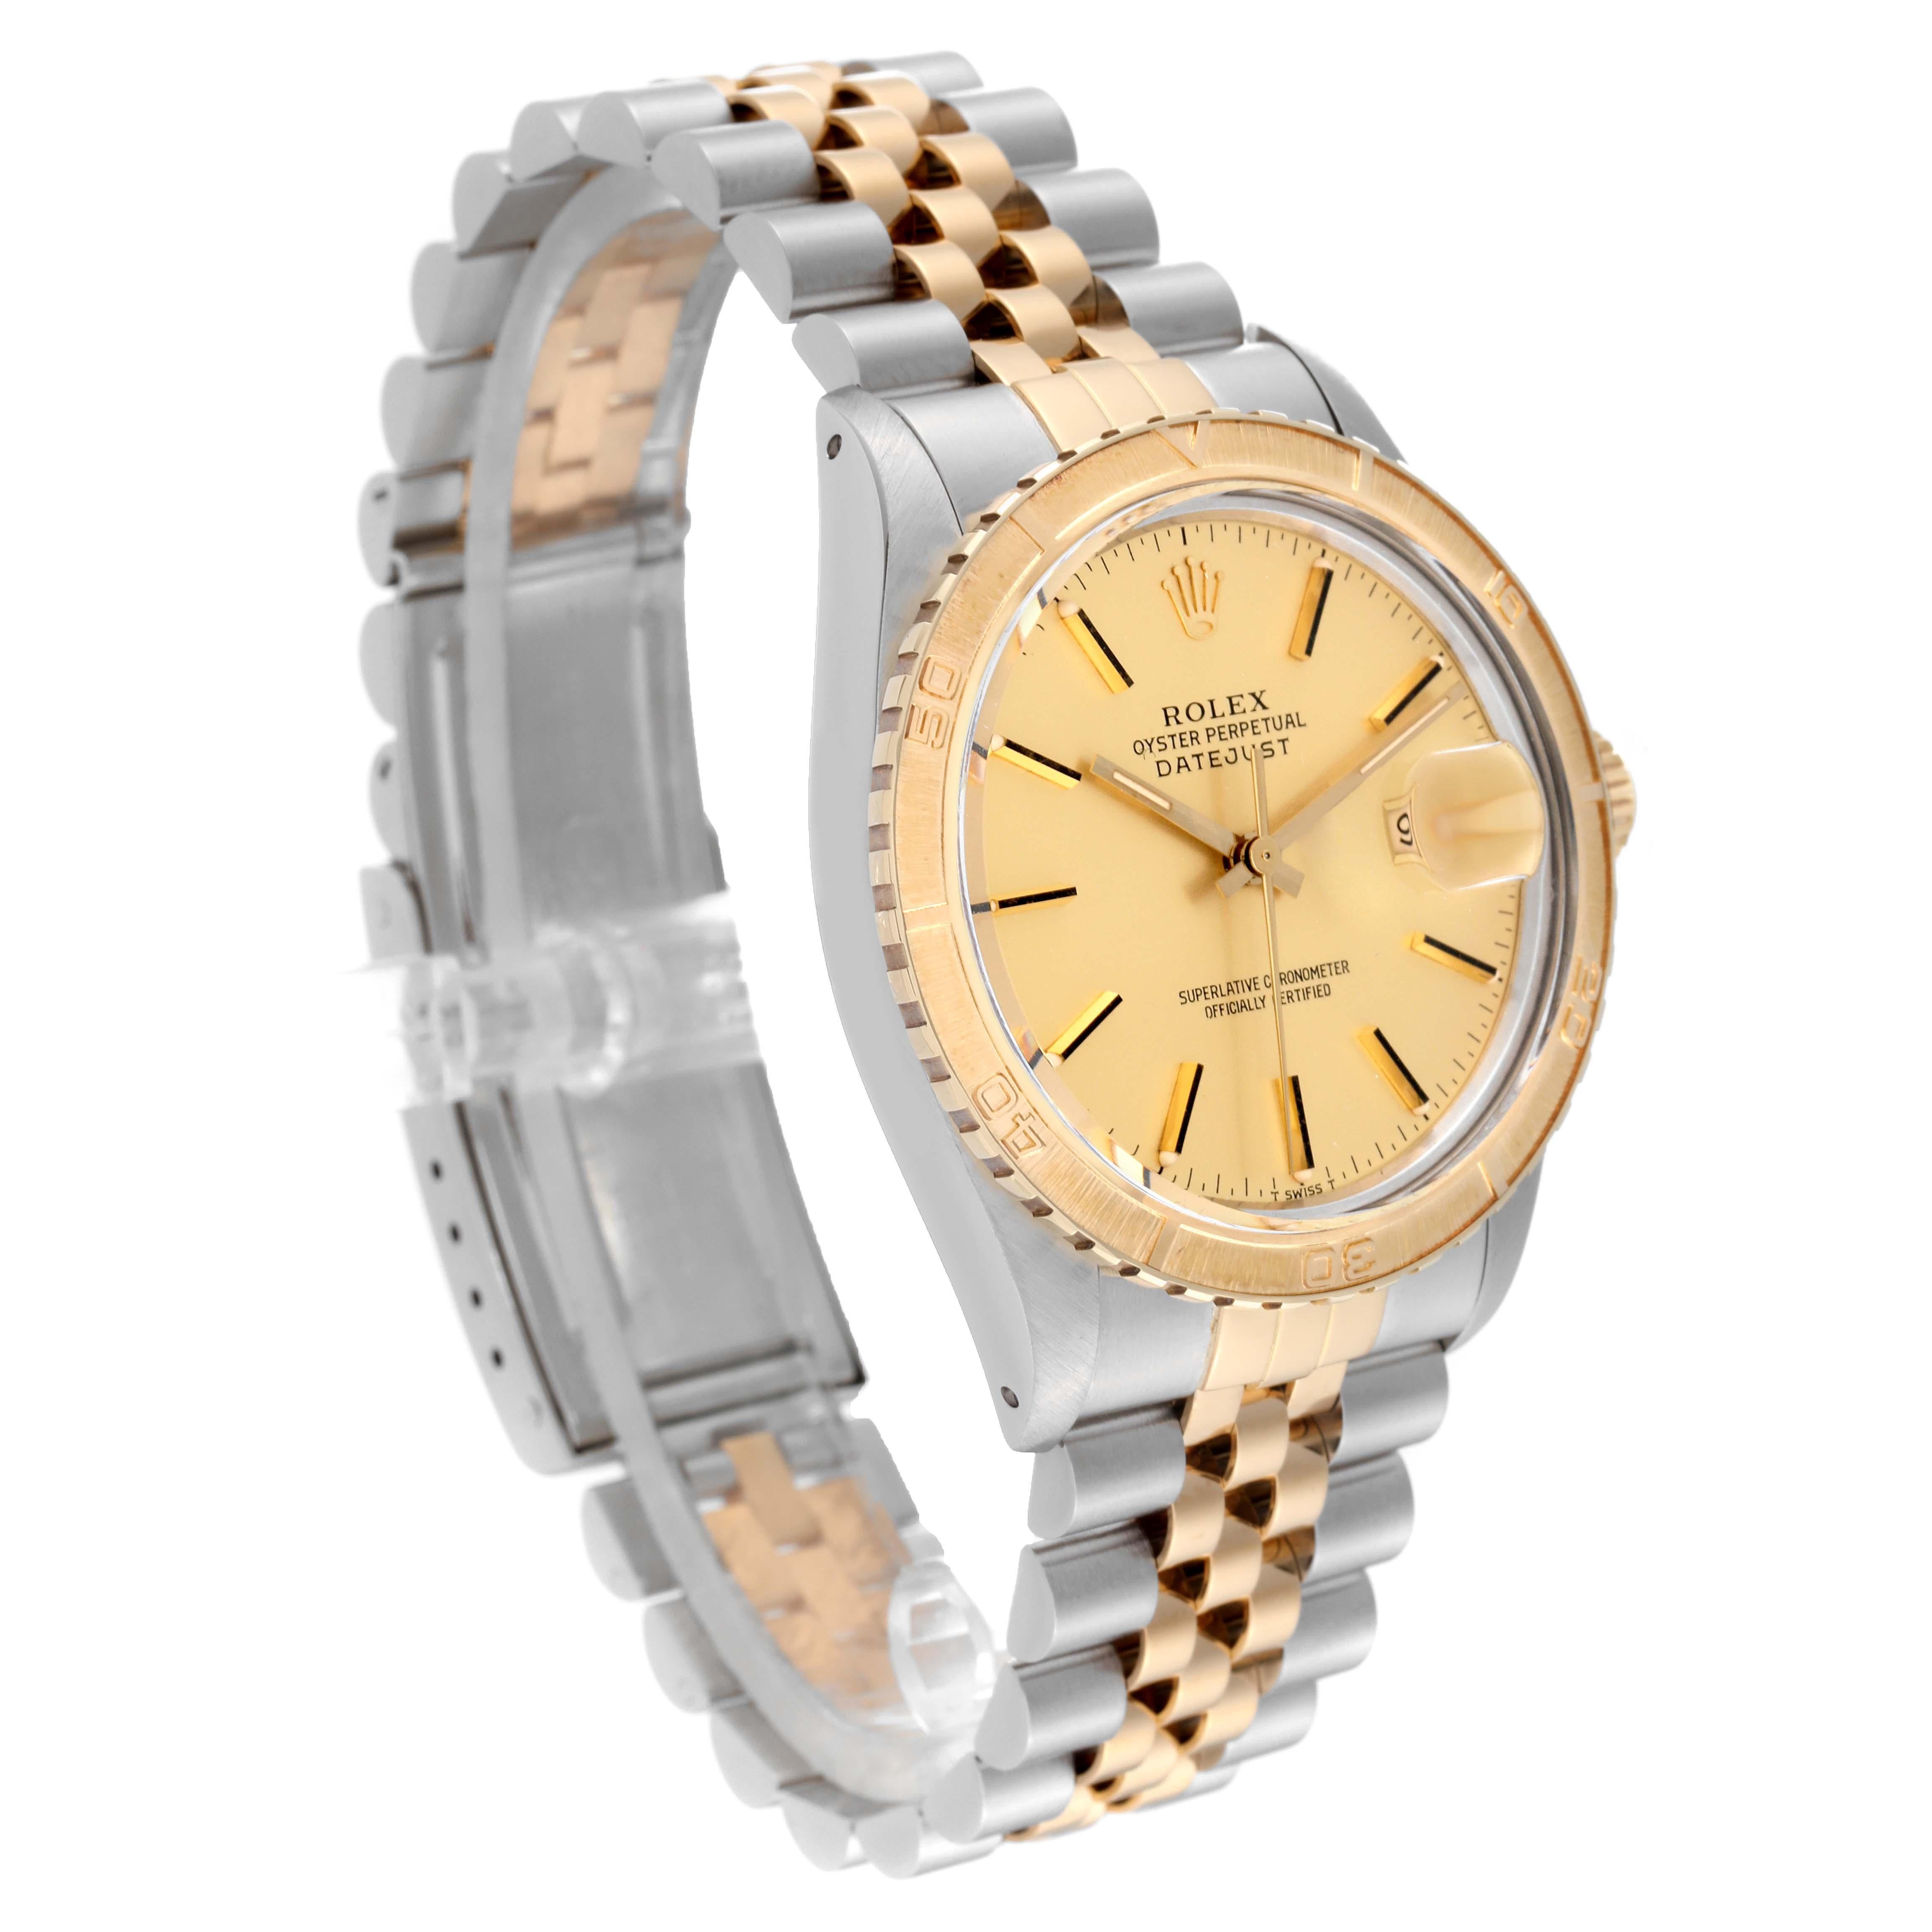 Men's Rolex Datejust Turnograph Steel Yellow Gold Vintage Mens Watch 16253 Box Papers For Sale